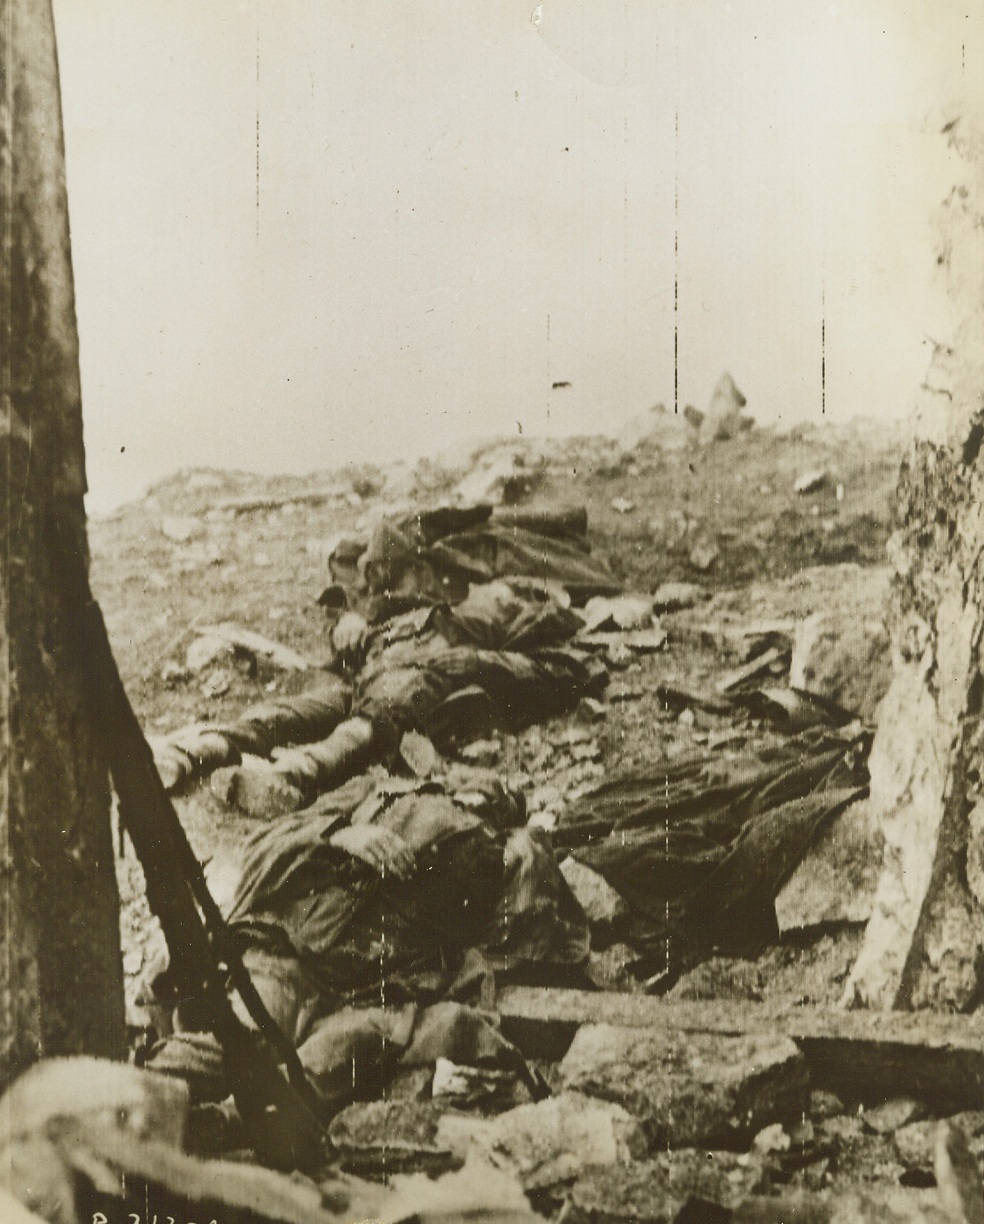 Death Plays No Favorites, 12/13/1943. ITALY – Death favors no side in this war. Dead British and German soldiers lay side by side before the jagged entrance to Monastery Hill, where in life they fought each other hand to hand, with ‘no quarter” hostilityCredit (Signal Corps Radiotelephoto from Acme);